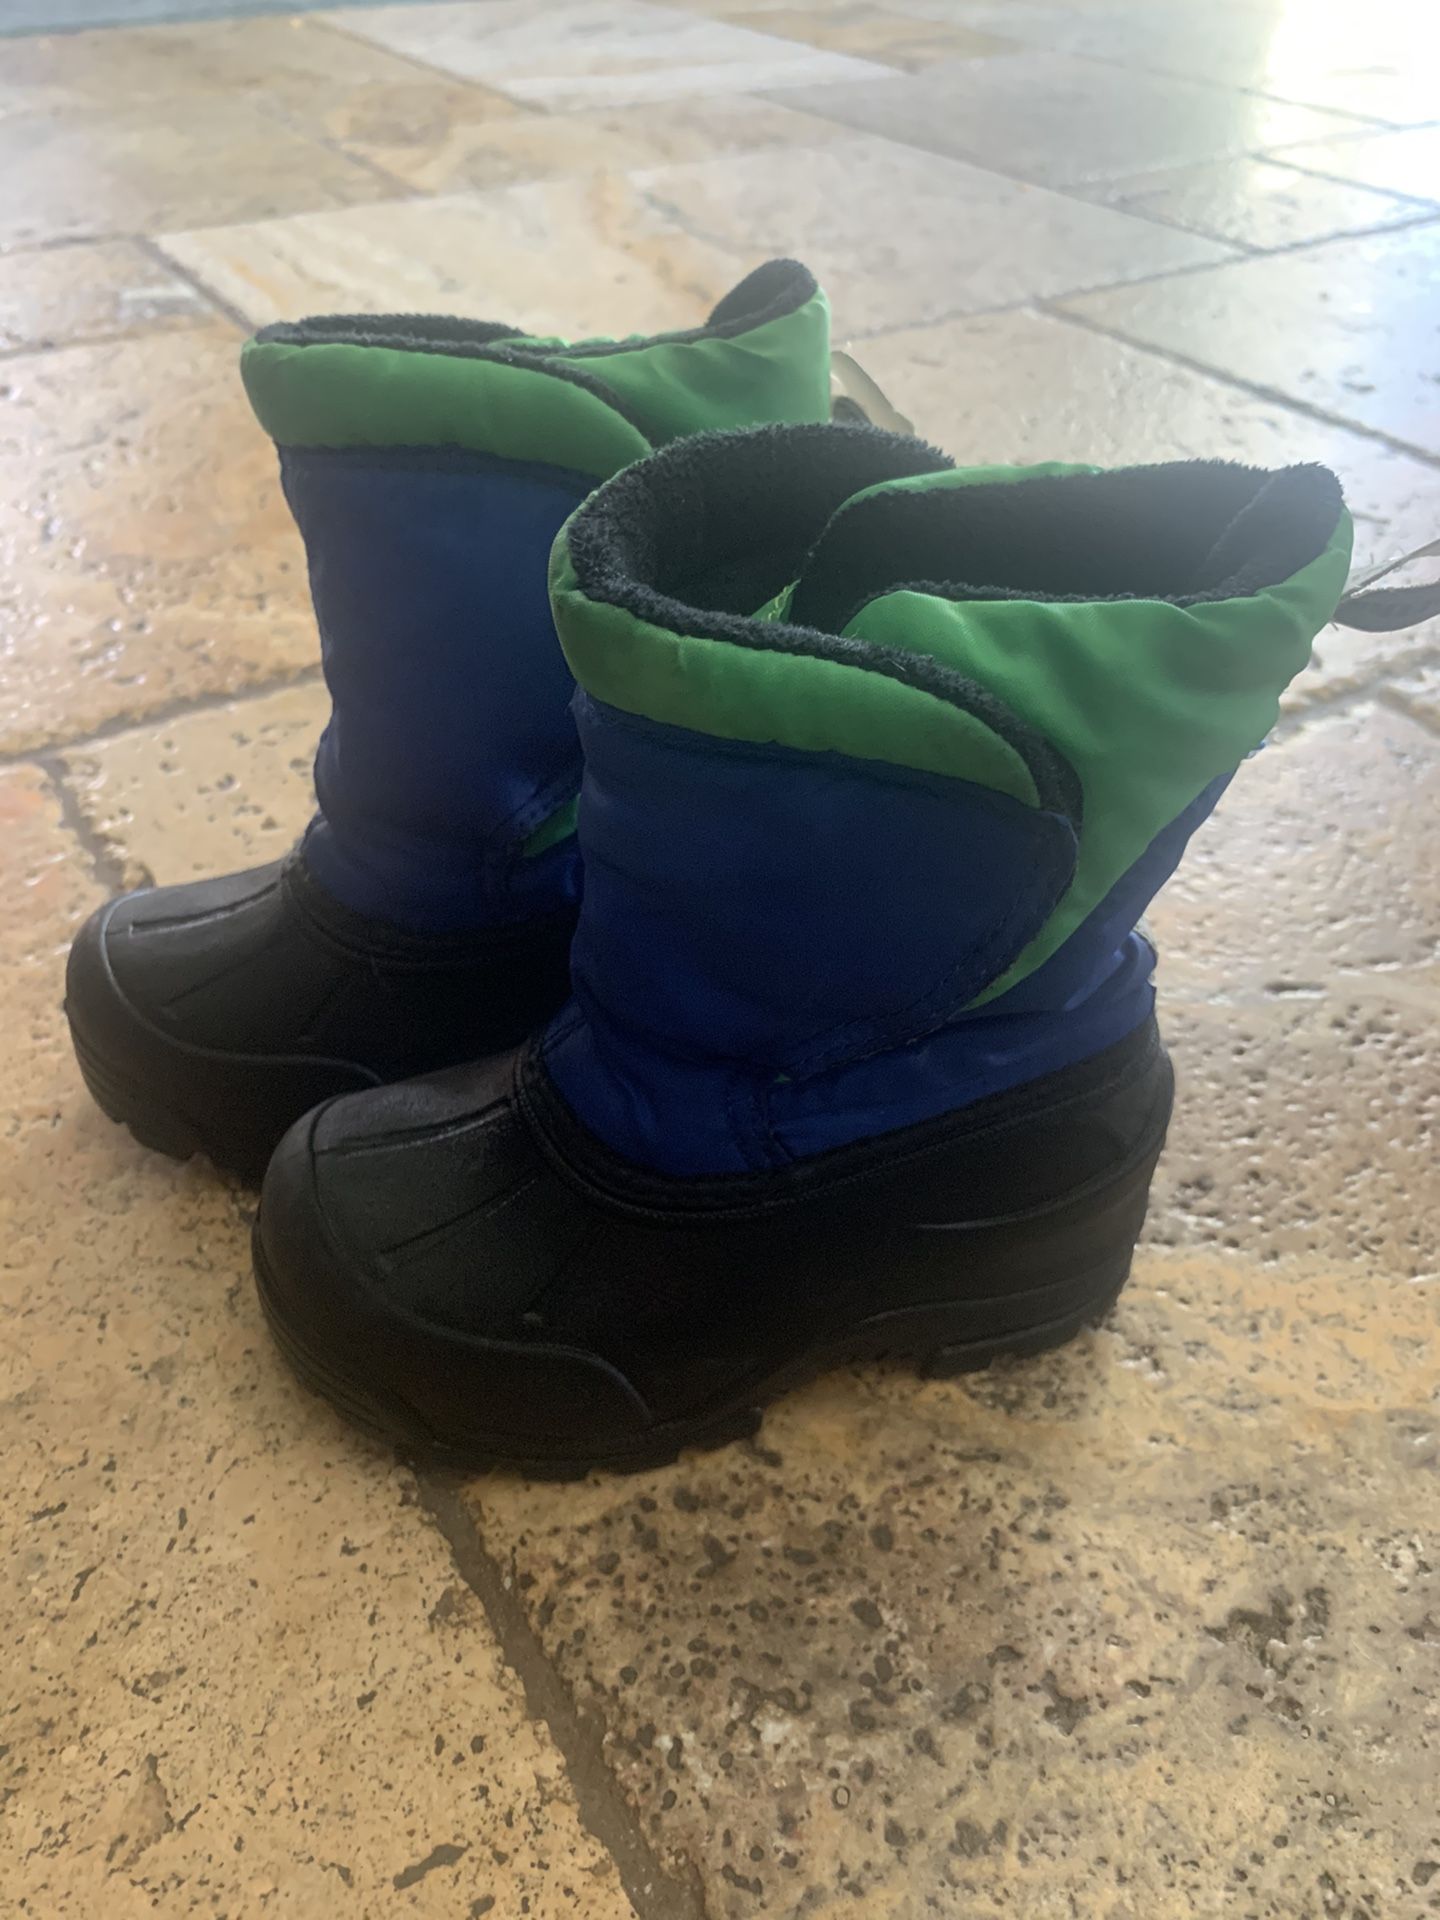 Northside toddler winter rain snow boots size 8